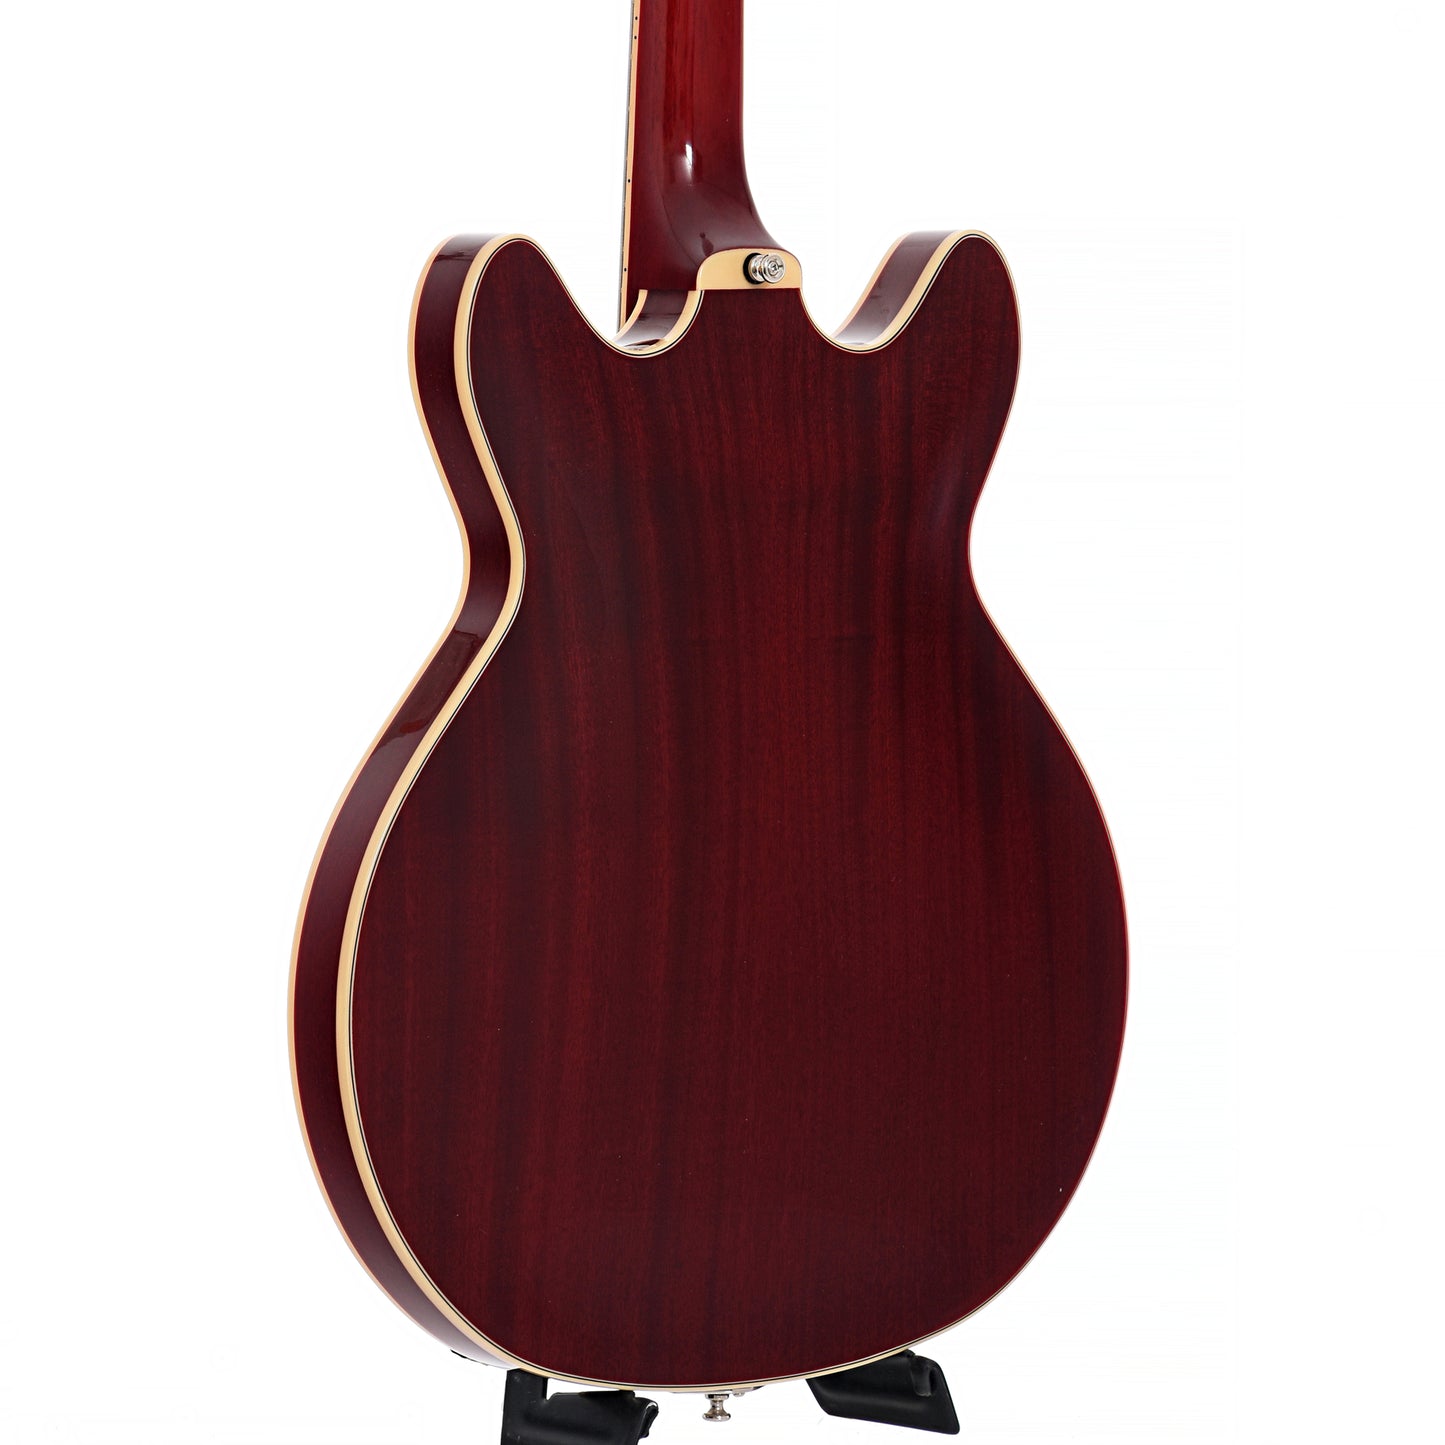 Guild Starfire 1 Lefthanded Bass, Cherry Red